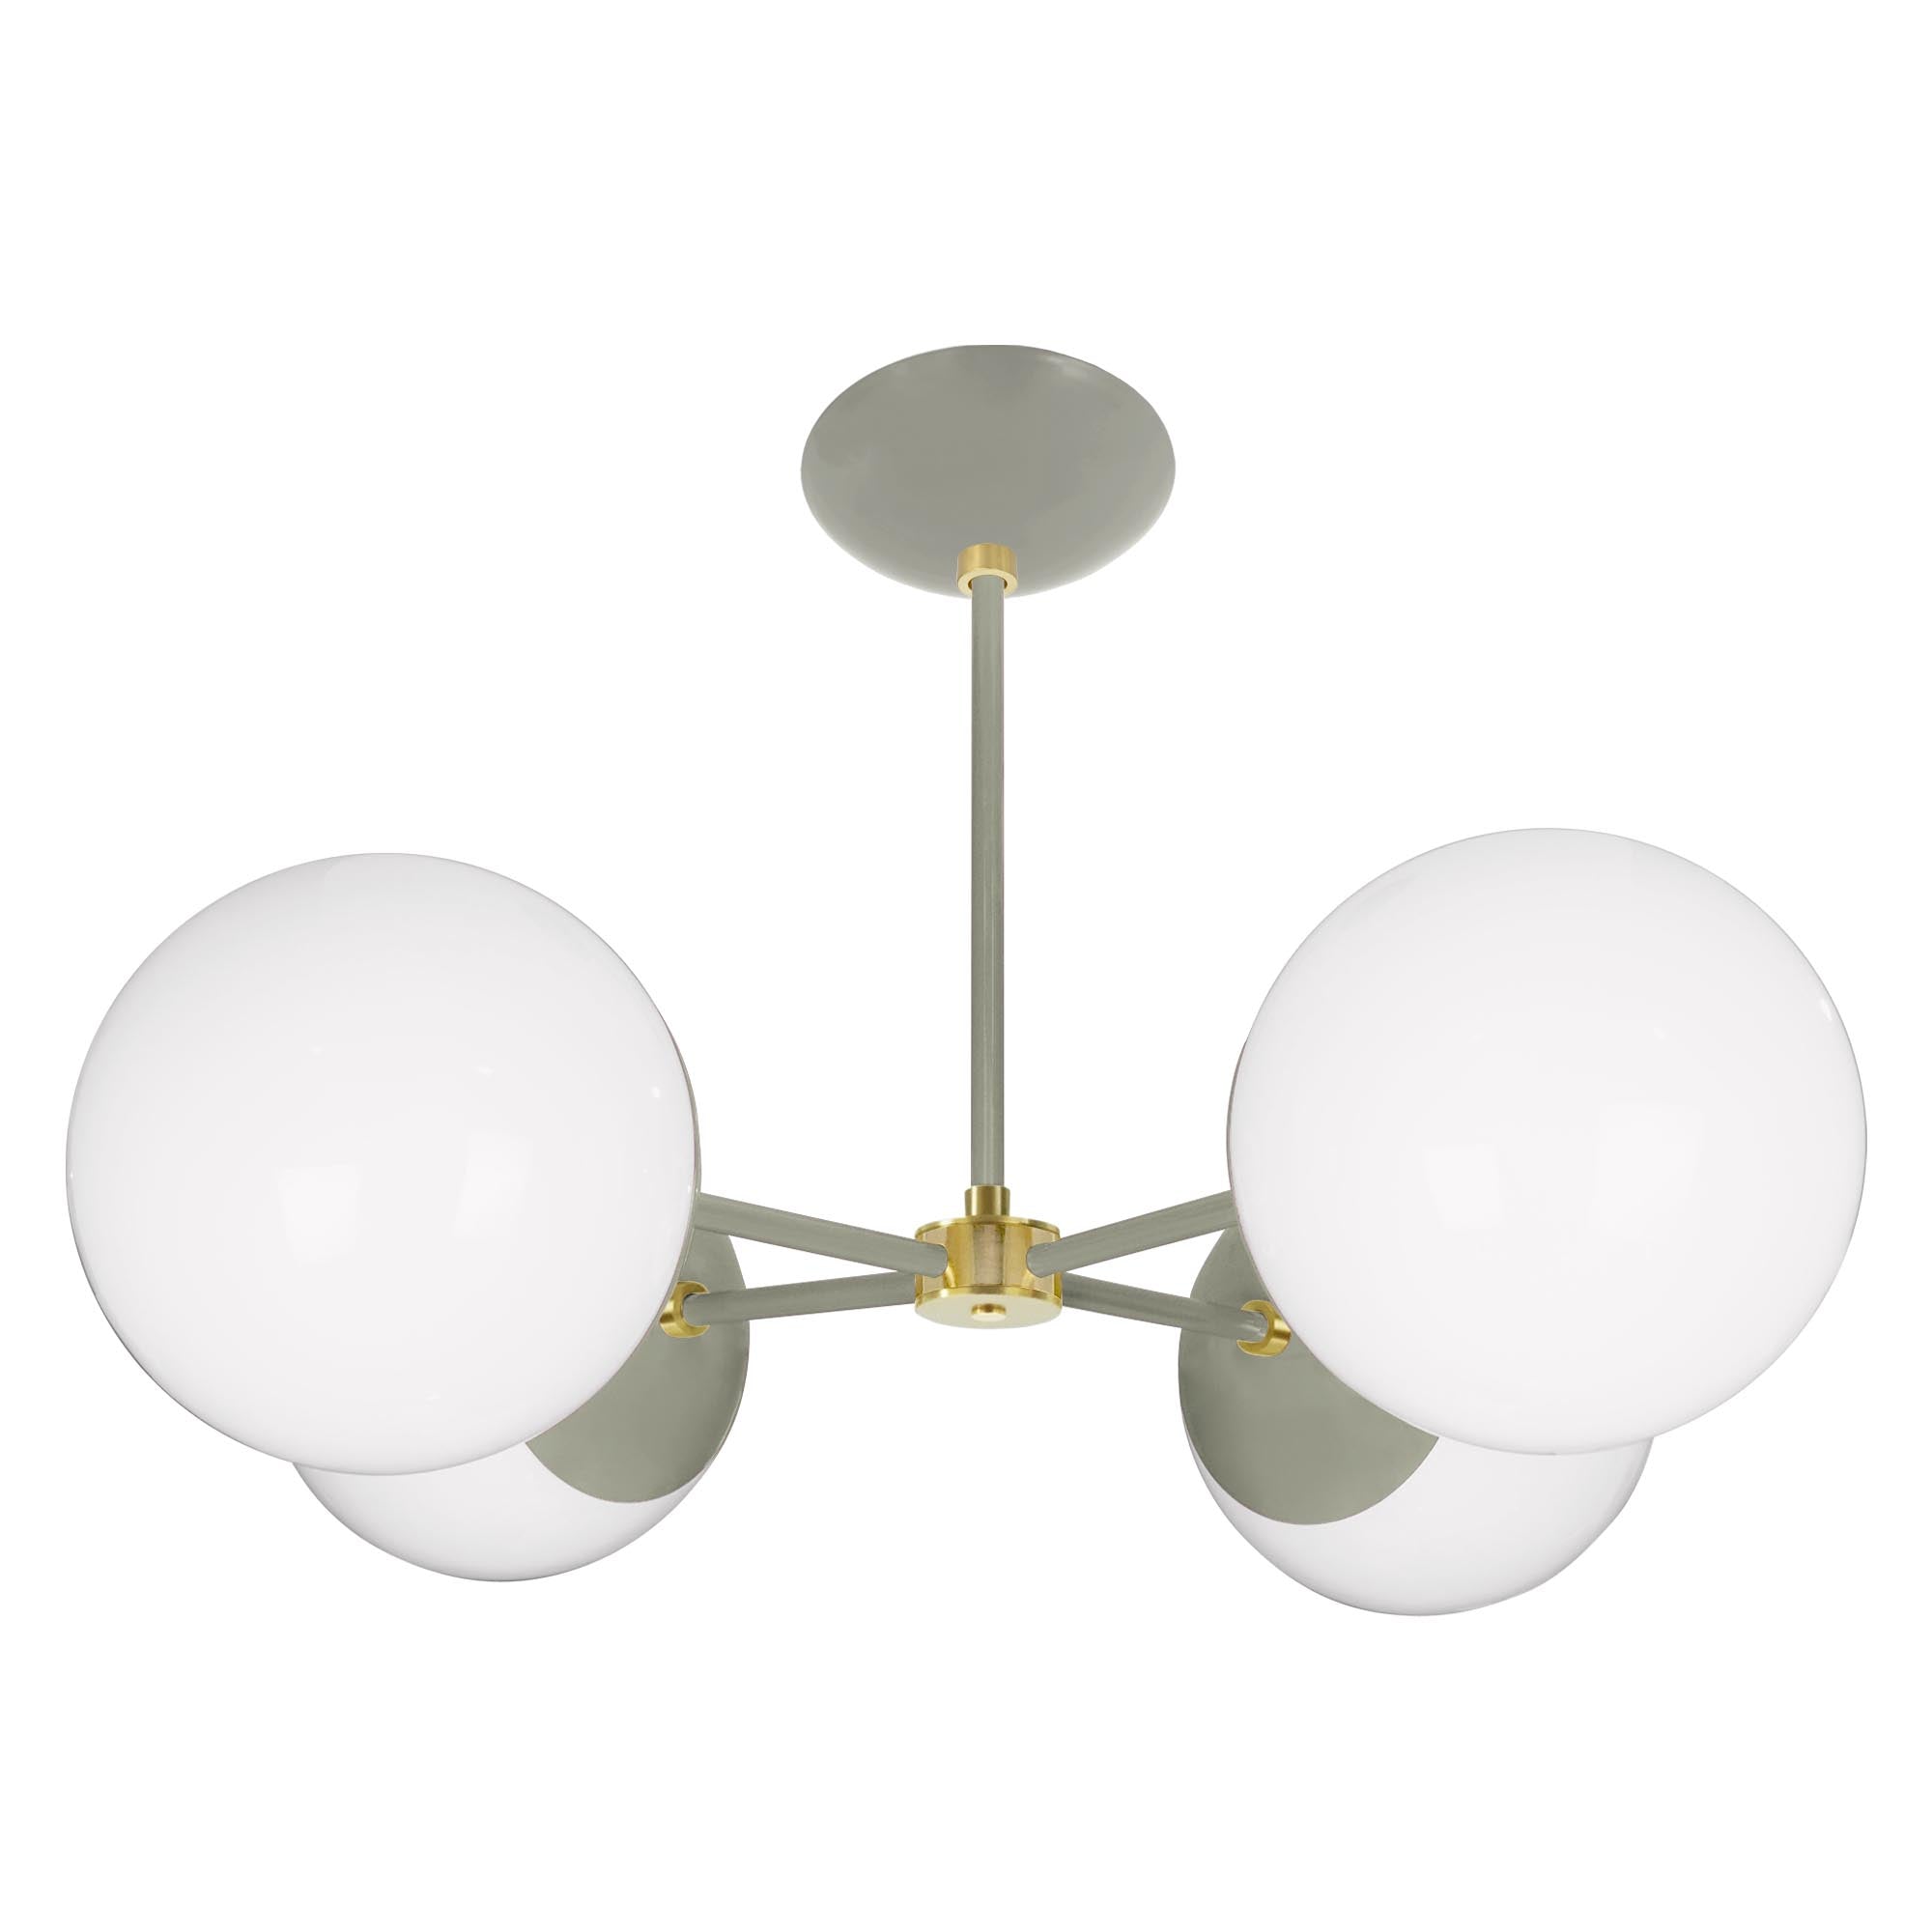 Brass and spa color Big Orbi chandelier Dutton Brown lighting